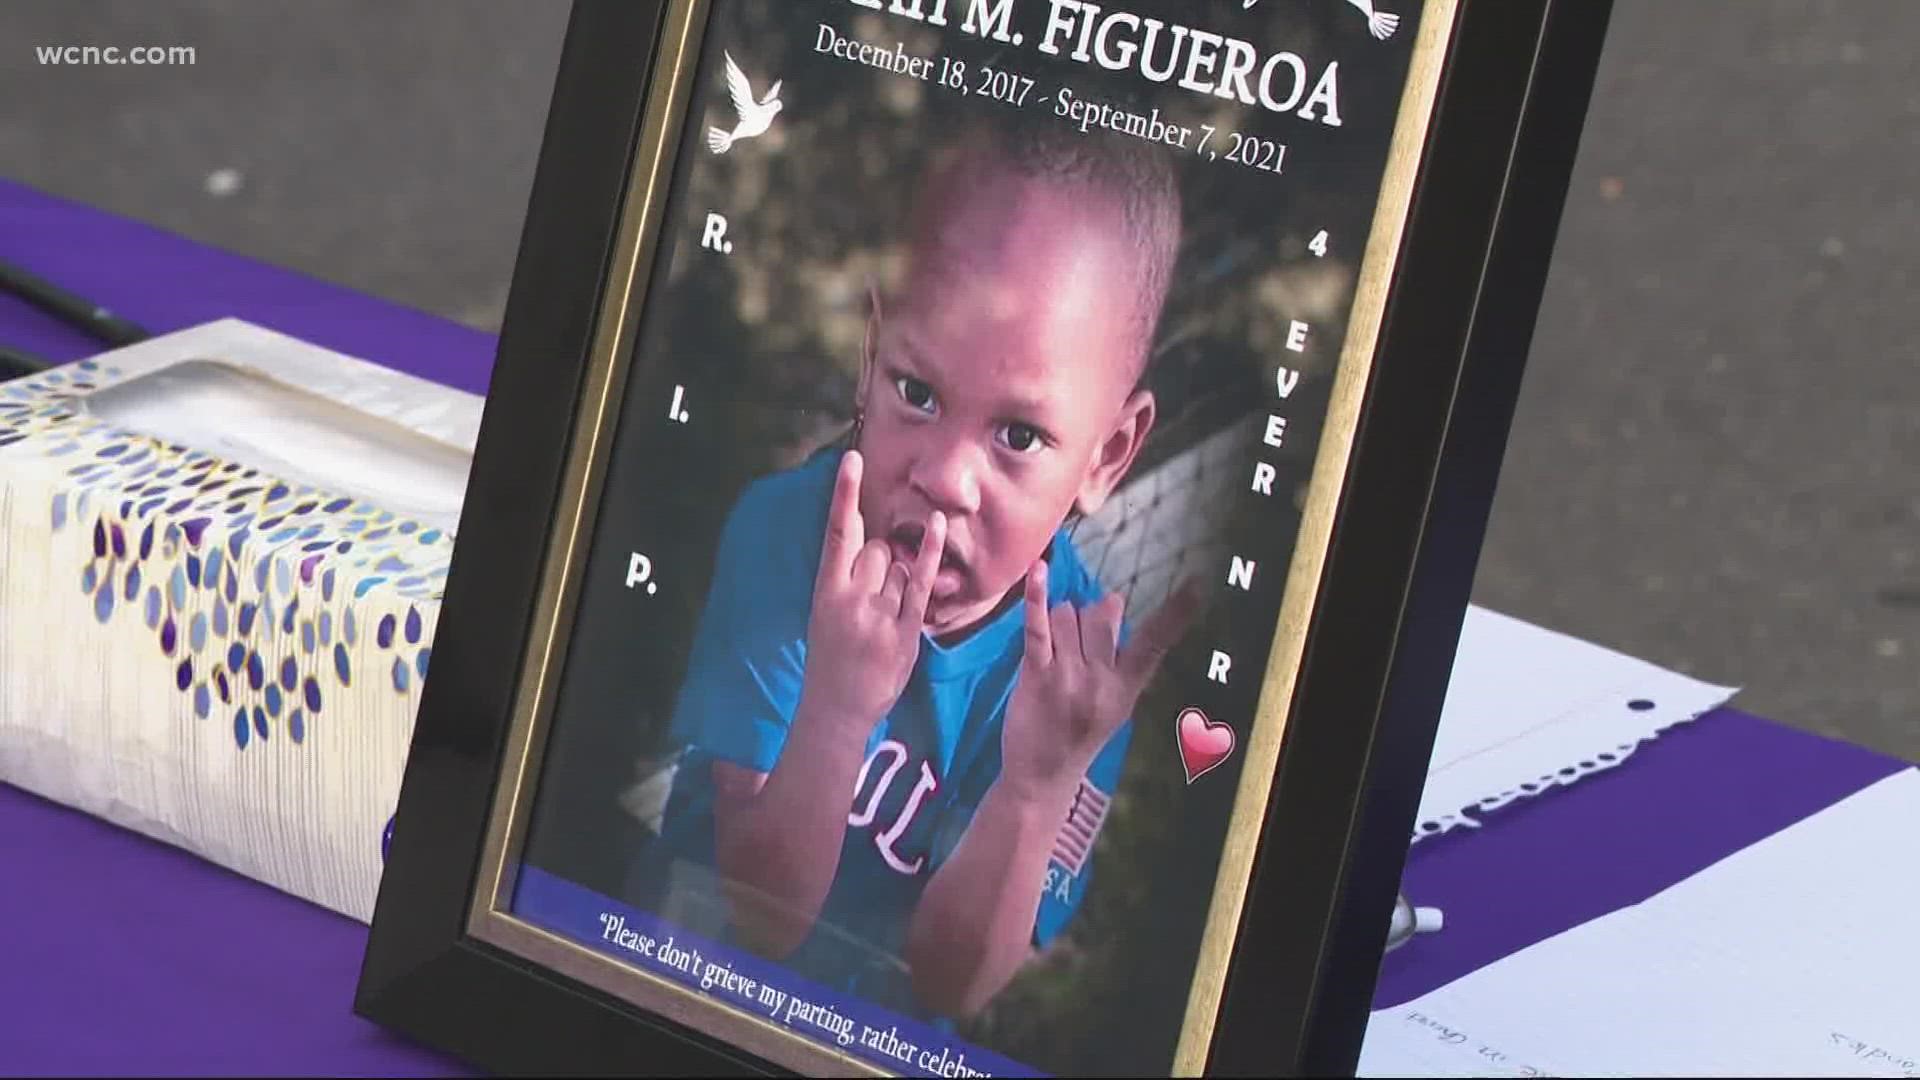 The tragic drive-by shooting death of the toddler in northwest Charlotte has left the community in shock.